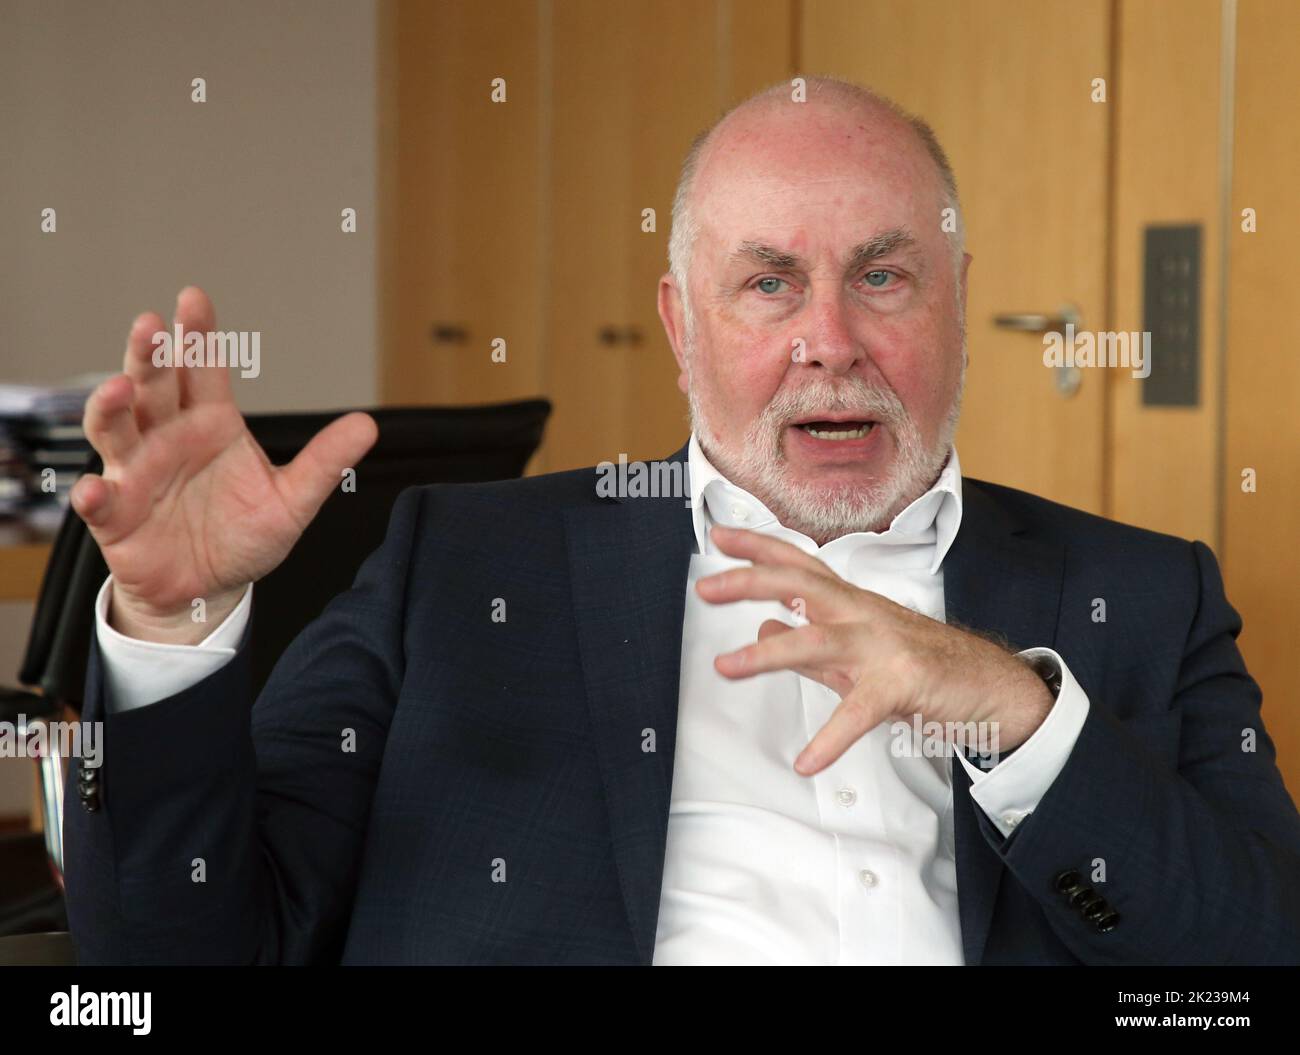 Berlin, Germany. 20th Sep, 2022. Ulrich Silberbach, head of the dbb, during a dpa interview on the upcoming round of public sector pay talks. Credit: Wolfgang Kumm/dpa/Alamy Live News Stock Photo